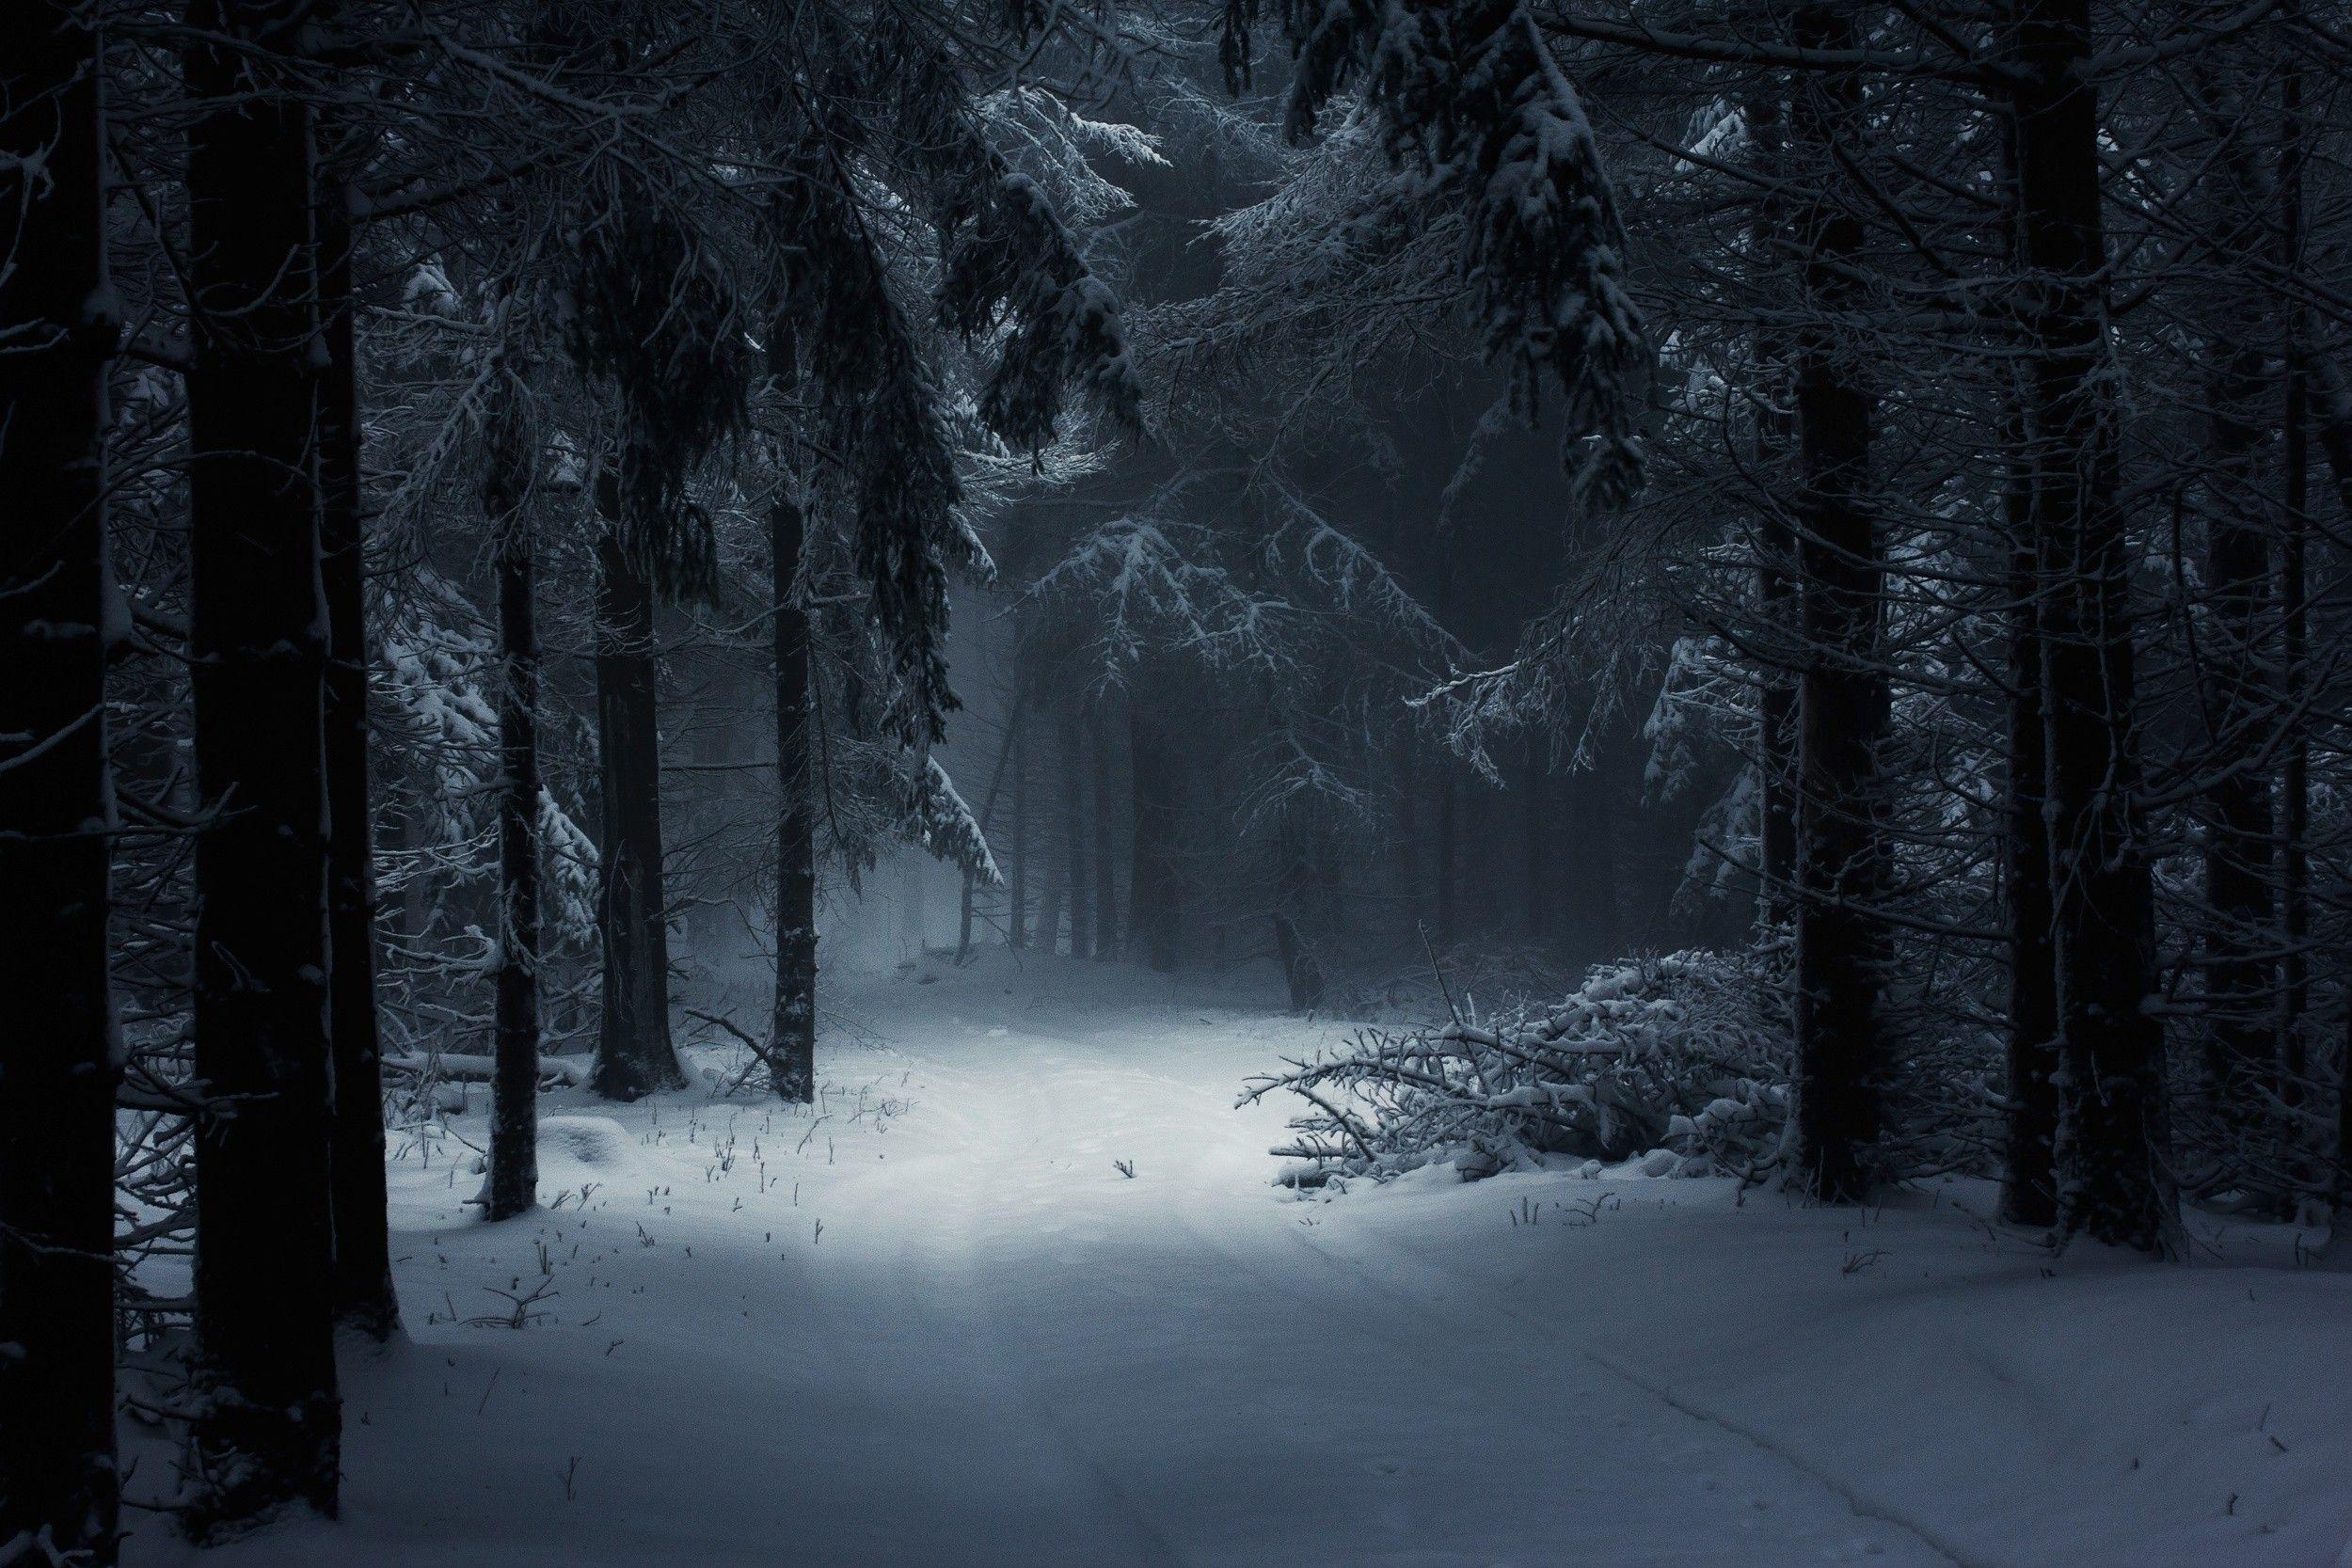 landscape nature winter forest snow mist daylight path trees atmosphere fairy tale Hungary. Winter forest, Winter photography, Landscape